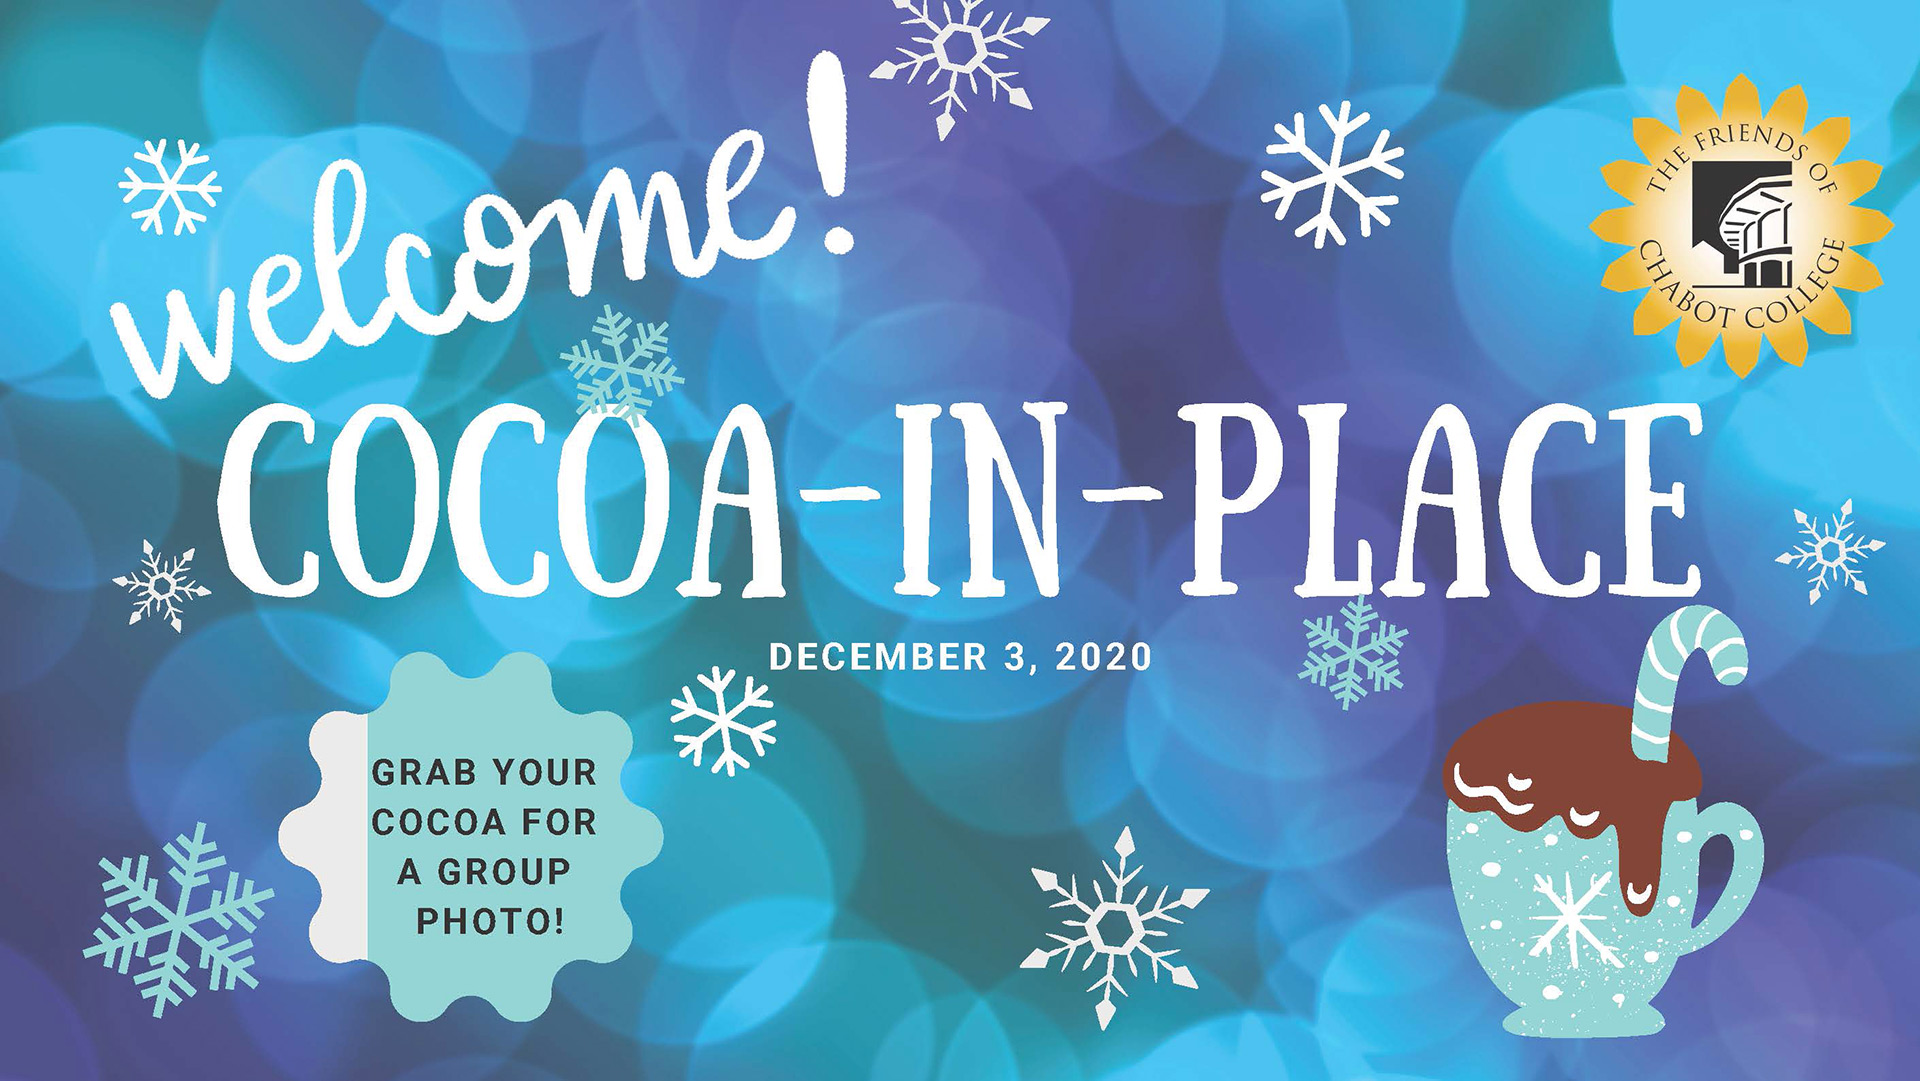 Cocoa-in-Place